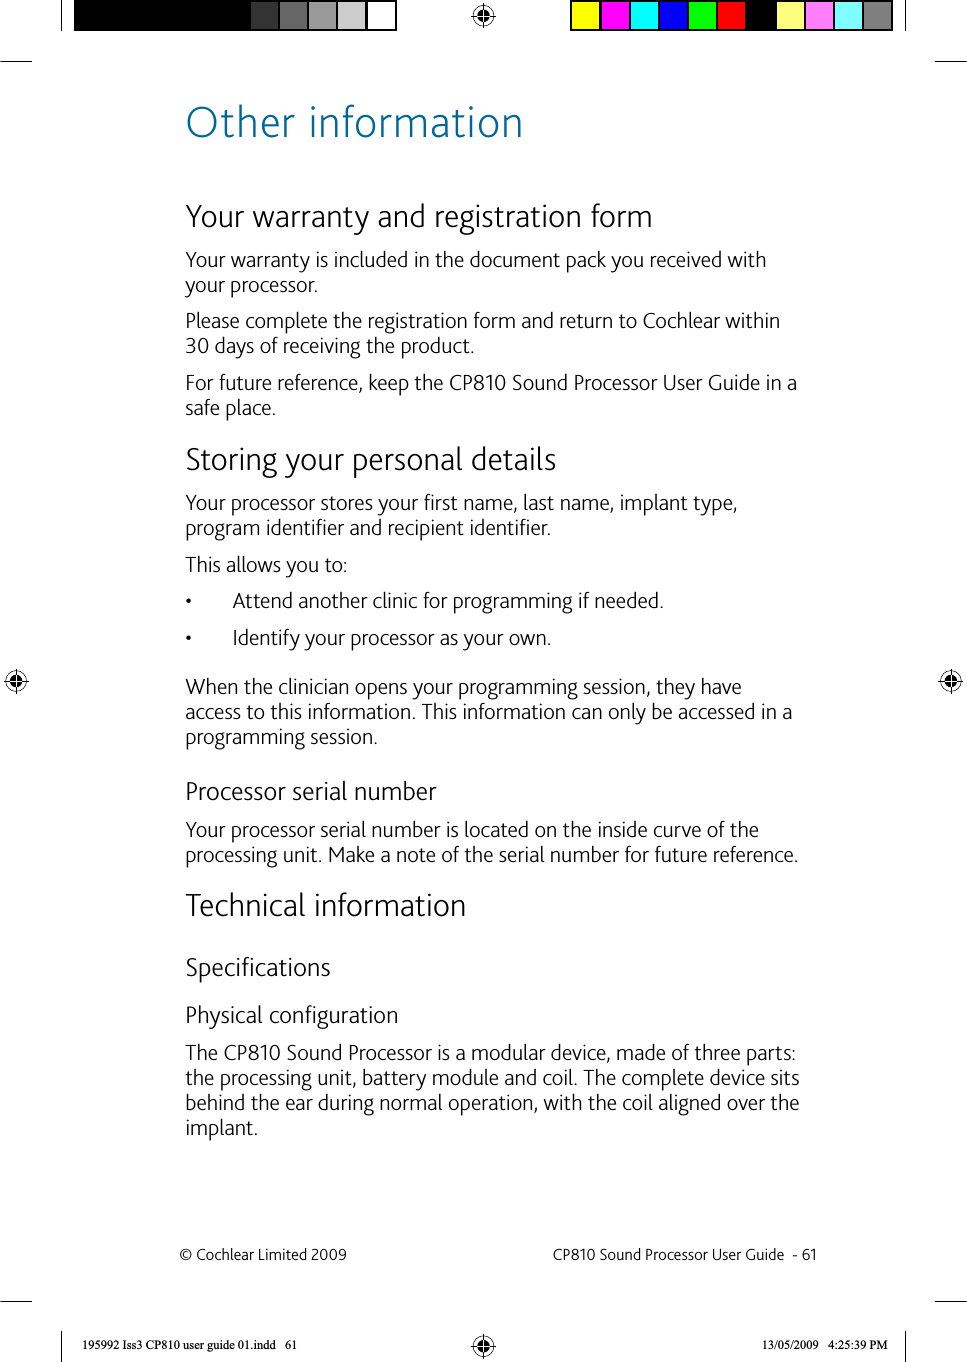 Other informationYour   warranty and registration formYour warranty is included in the document pack you received with your processor.Please complete the registration form and return to Cochlear within 30 days of receiving the product. For future reference, keep the CP810 Sound Processor User Guide in a safe place.Storing your  personal detailsYour processor stores your ﬁ rst name, last name, implant type, program identiﬁ er and recipient identiﬁ er. This allows you to: Attend another clinic for programming if needed.• Identify your processor as your own.• When the clinician opens your programming session, they have access to this information. This information can only be accessed in a programming session. Processor serial numberYour processor serial number is located on the inside curve of the processing unit. Make a note of the serial number for future reference.Technical information Speciﬁ cationsPhysical conﬁ gurationThe CP810 Sound Processor is a modular device, made of three parts: the processing unit, battery module and coil. The complete device sits behind the ear during normal operation, with the coil aligned over the implant.© Cochlear Limited 2009  CP810 Sound Processor User Guide  - 61195992 Iss3 CP810 user guide 01.indd   61 13/05/2009   4:25:39 PM